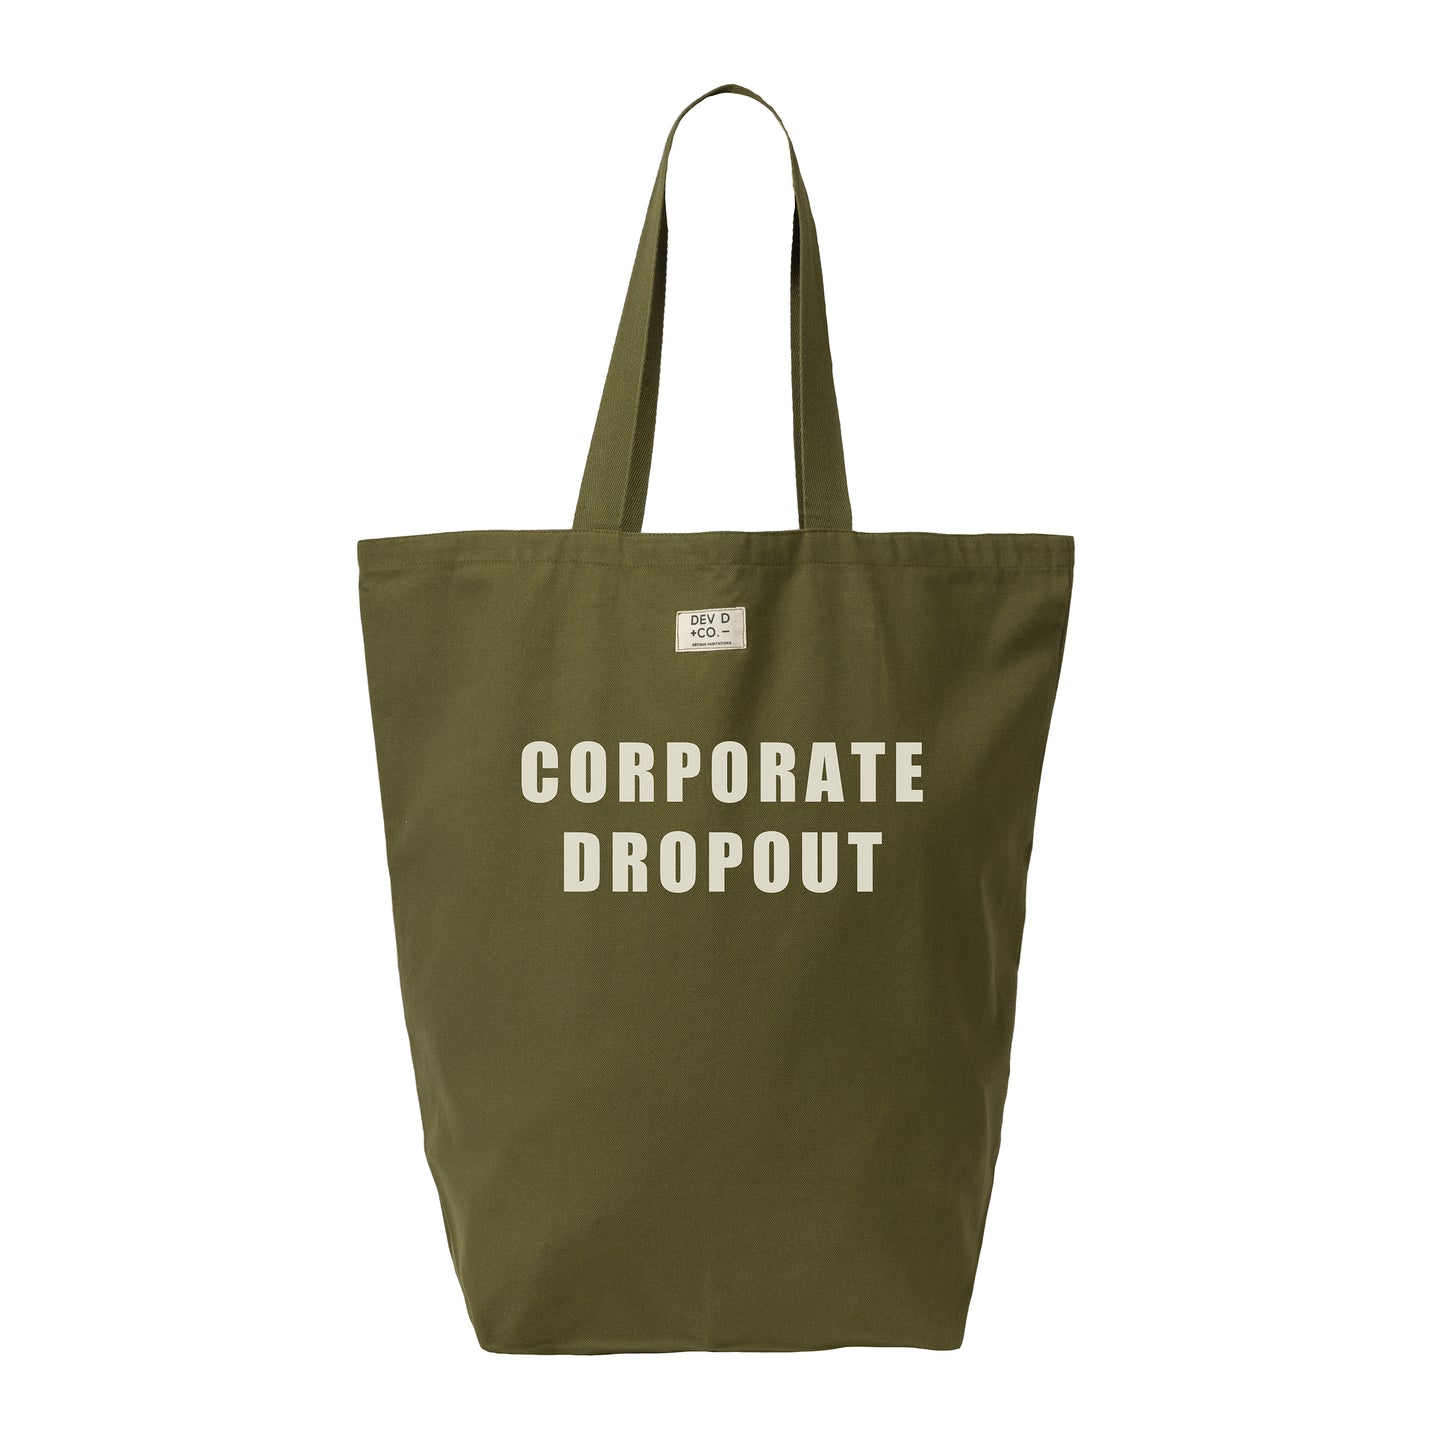 Corporate Dropout - Canvas Tote Bag with Pocket - Large Tote